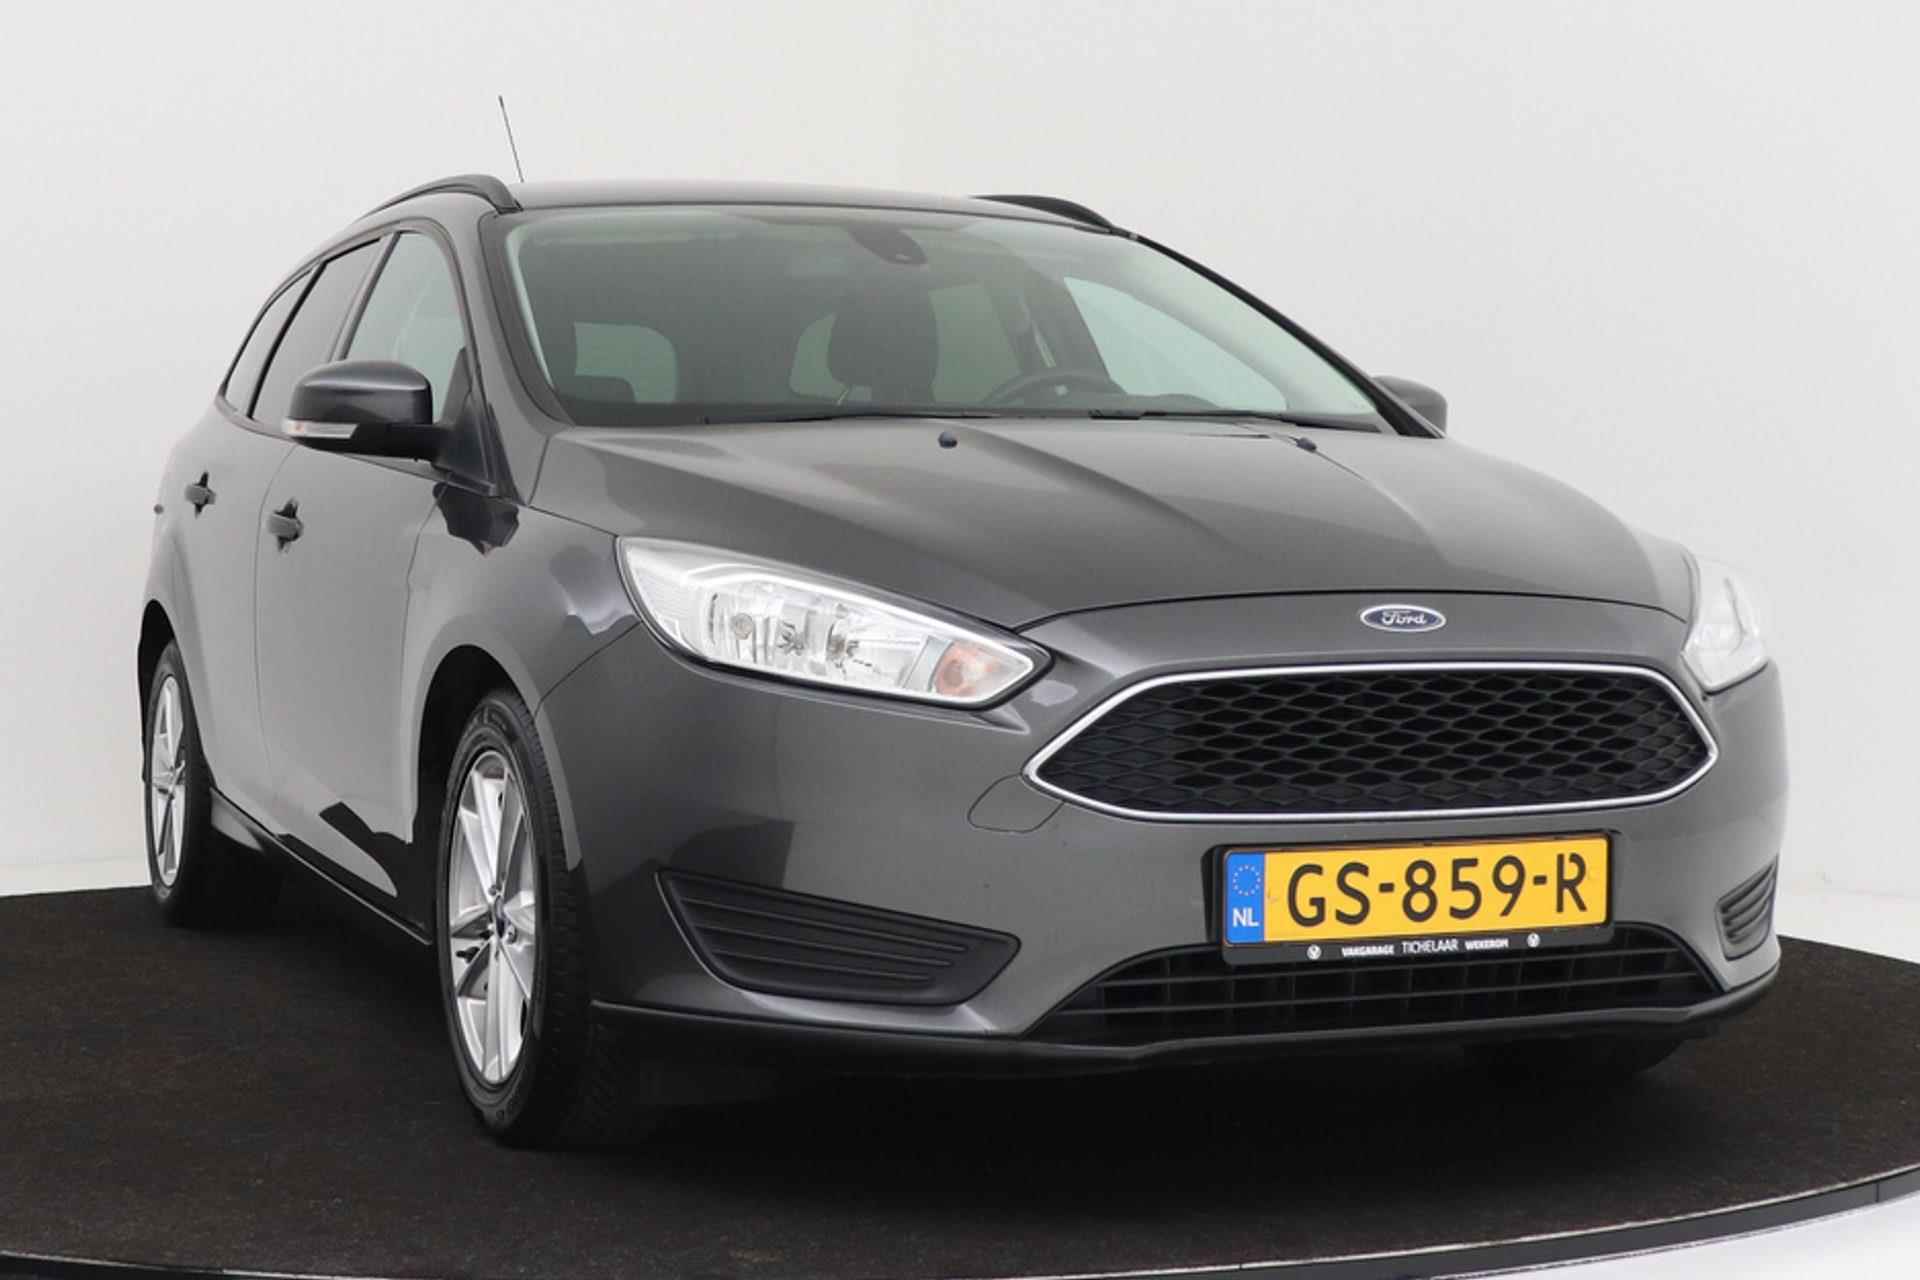 Ford Focus Wagon 1.0 Trend Edition | Org NL | Volledig Ond. | Airco | Cruise Control | - 12/36